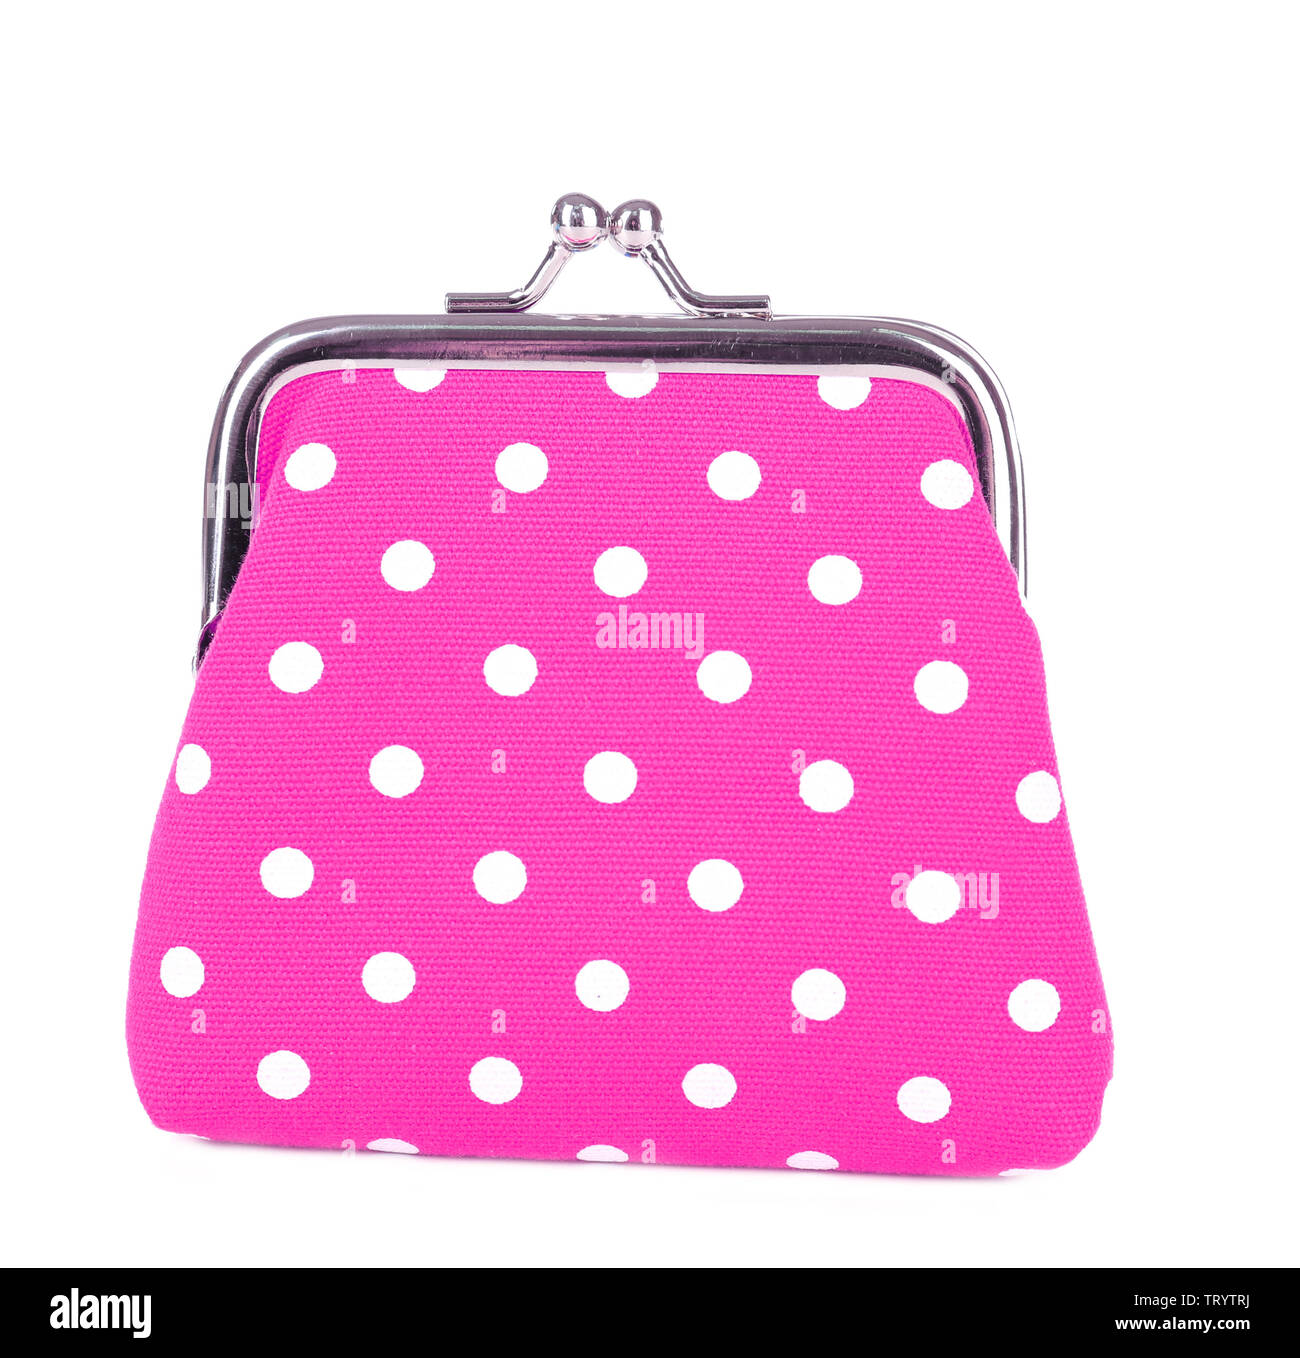 Pink purse isolated on white Stock Photo - Alamy